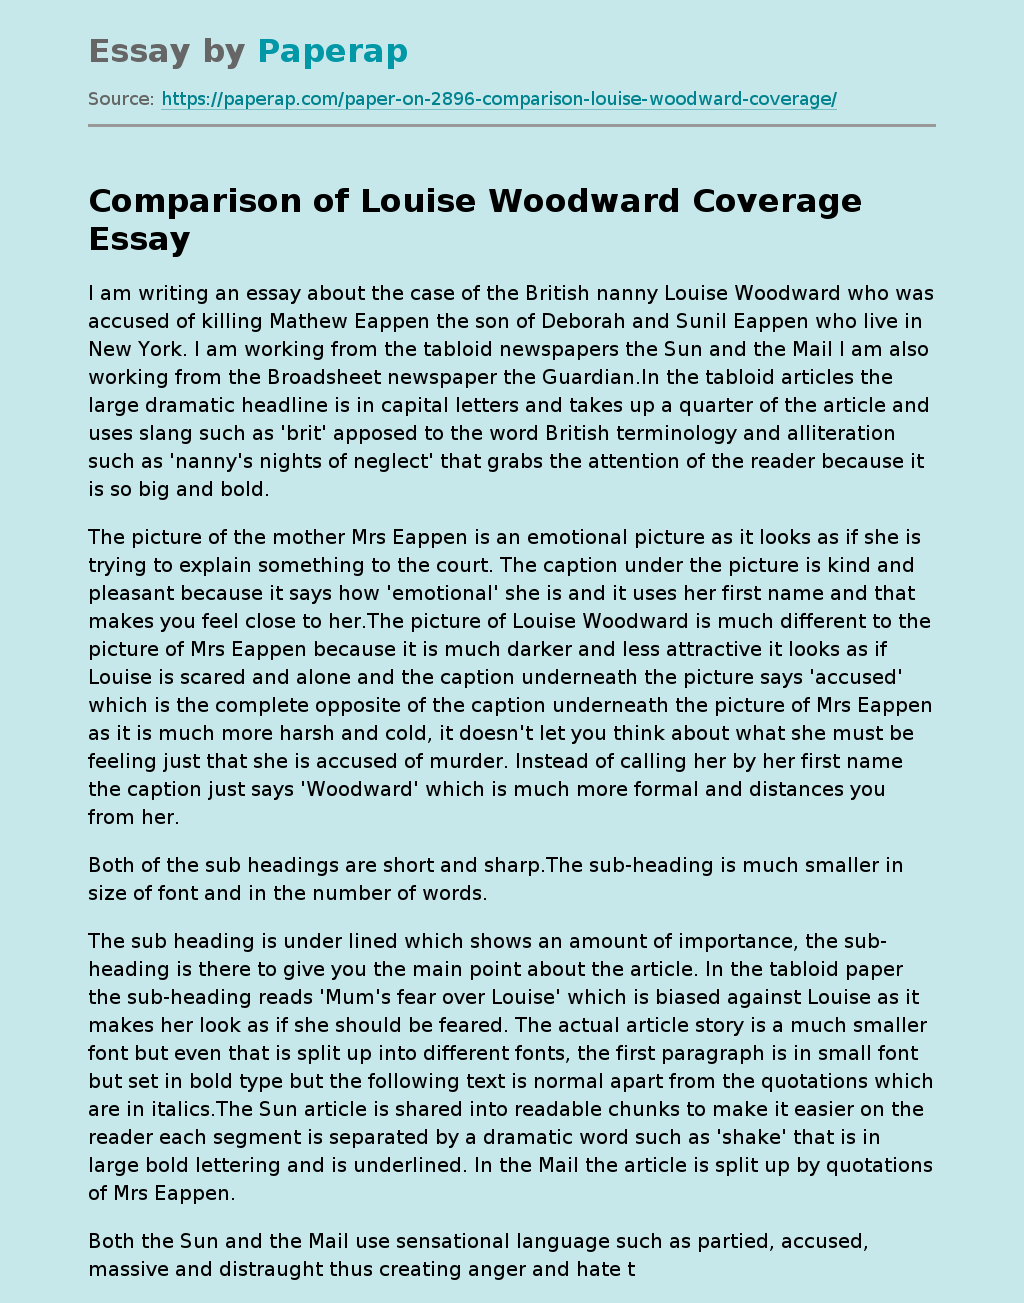 Comparison of Louise Woodward Coverage